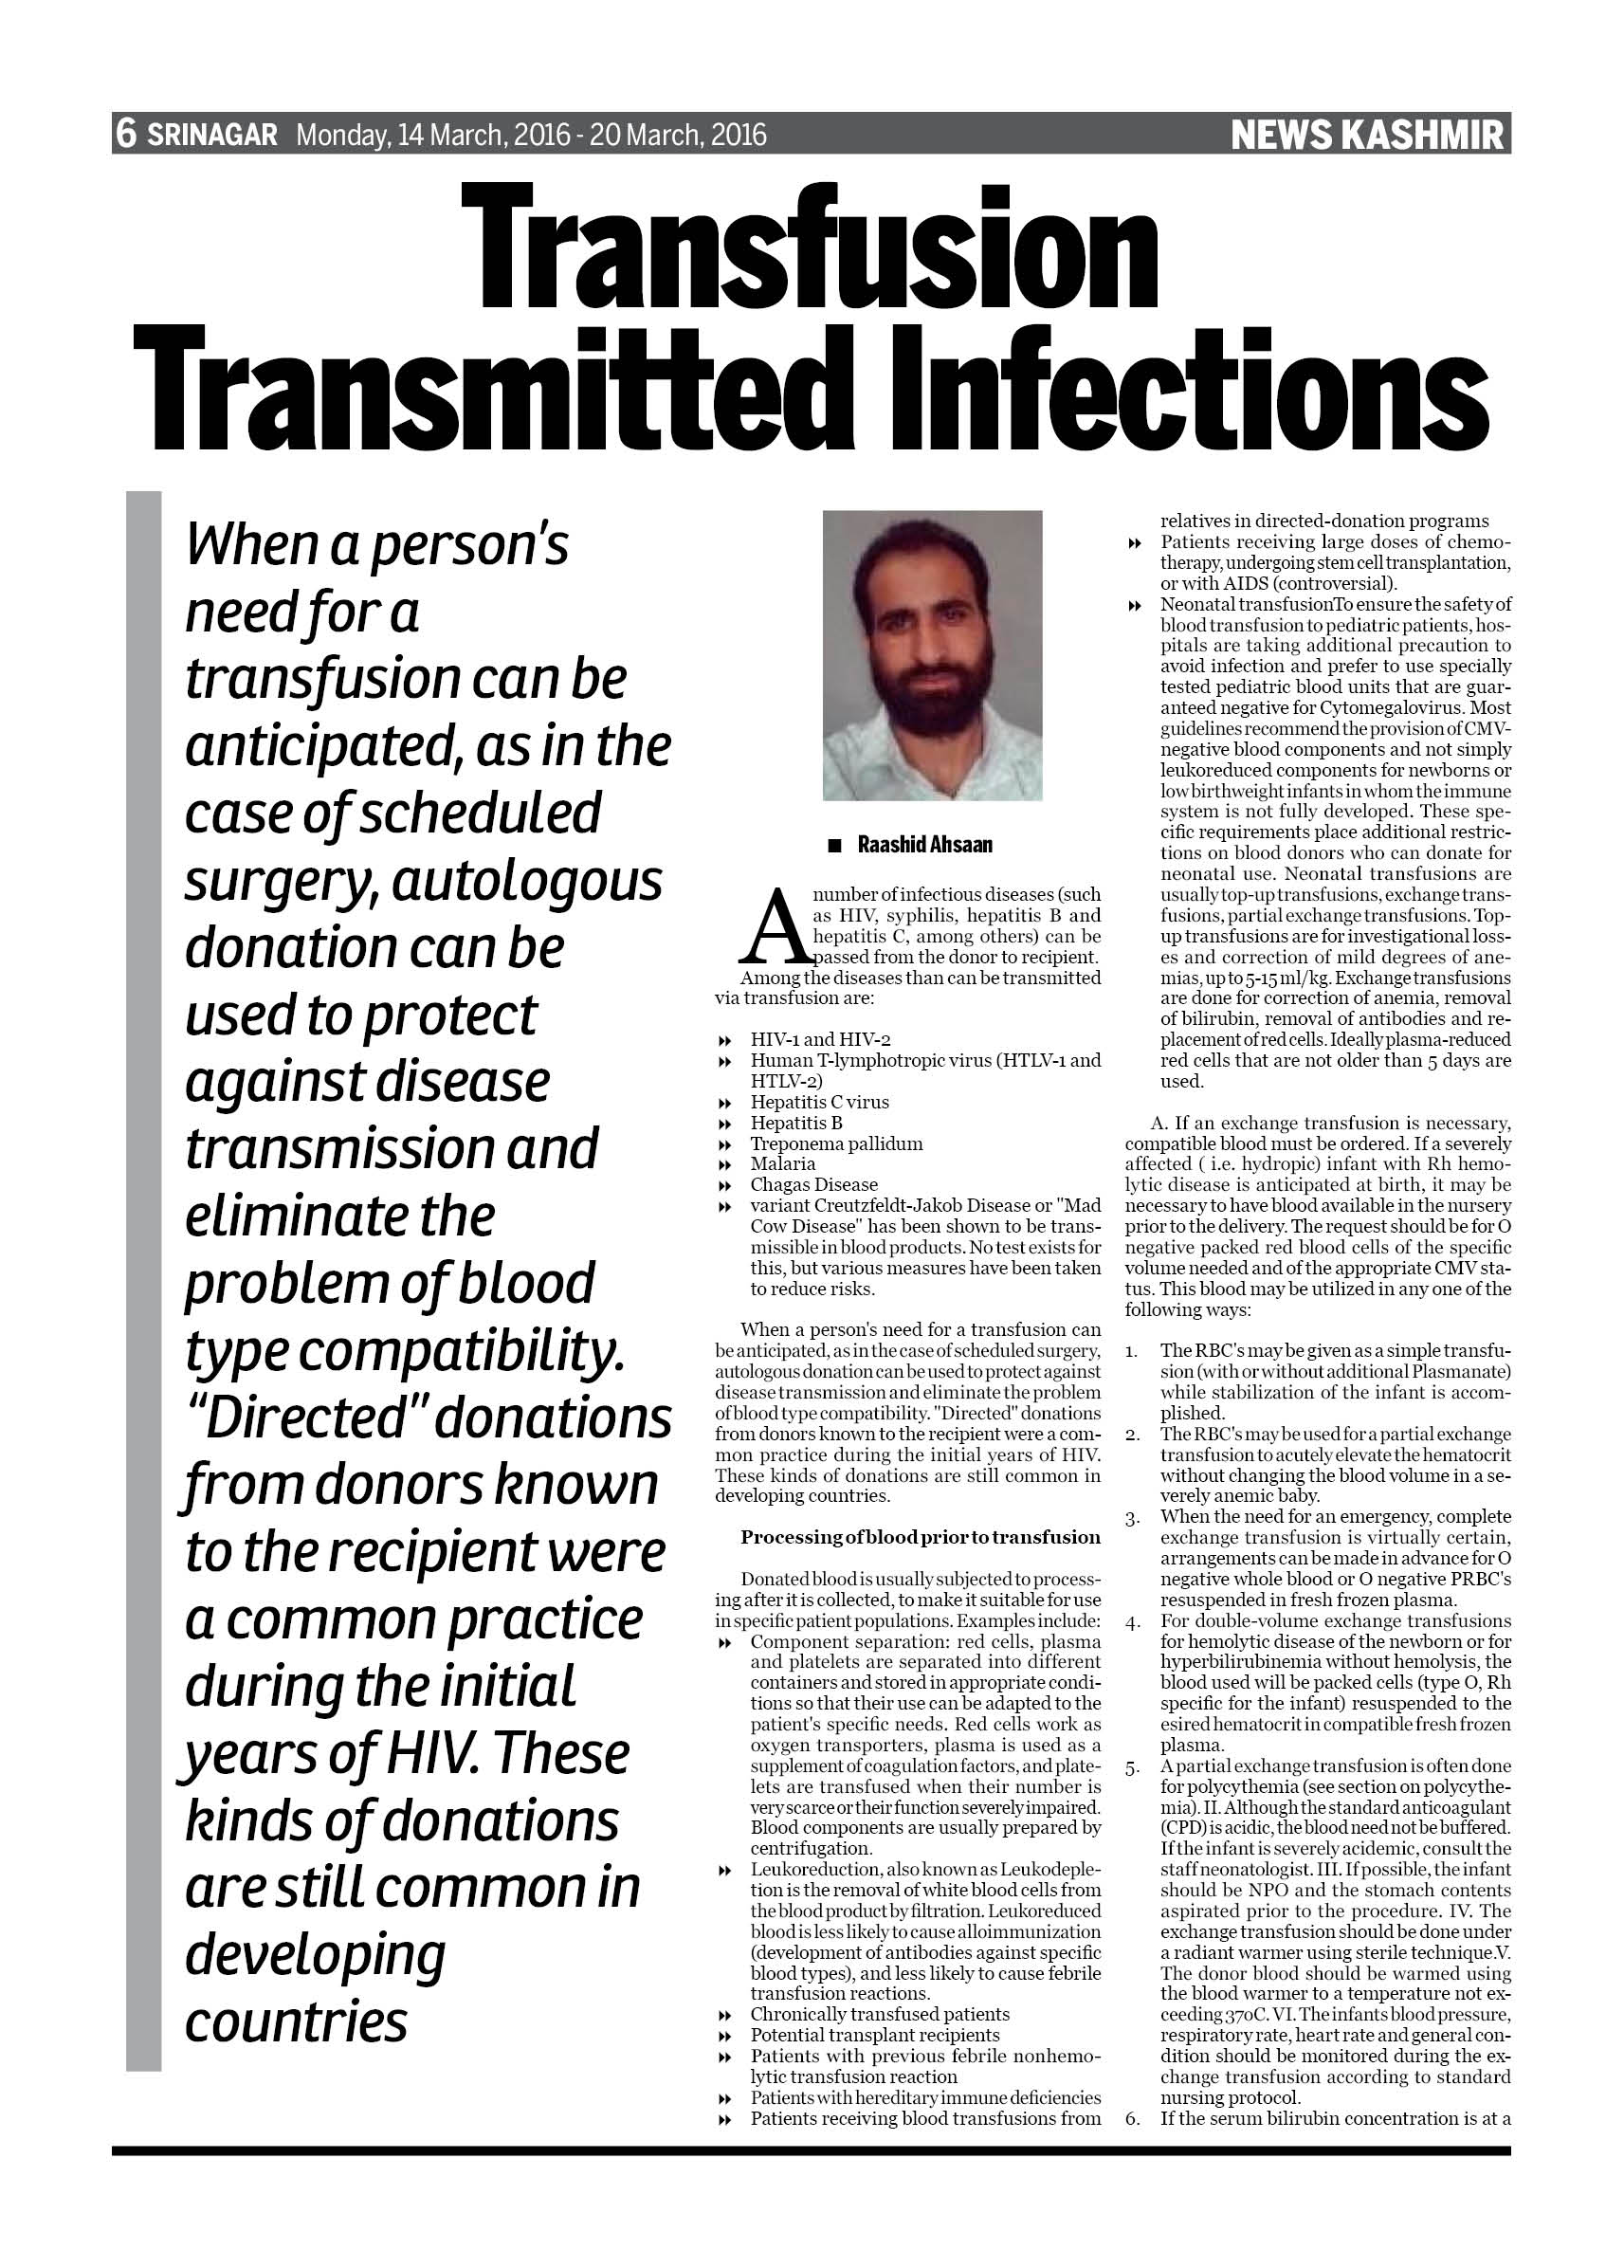 Transfusion Transmitted Infections